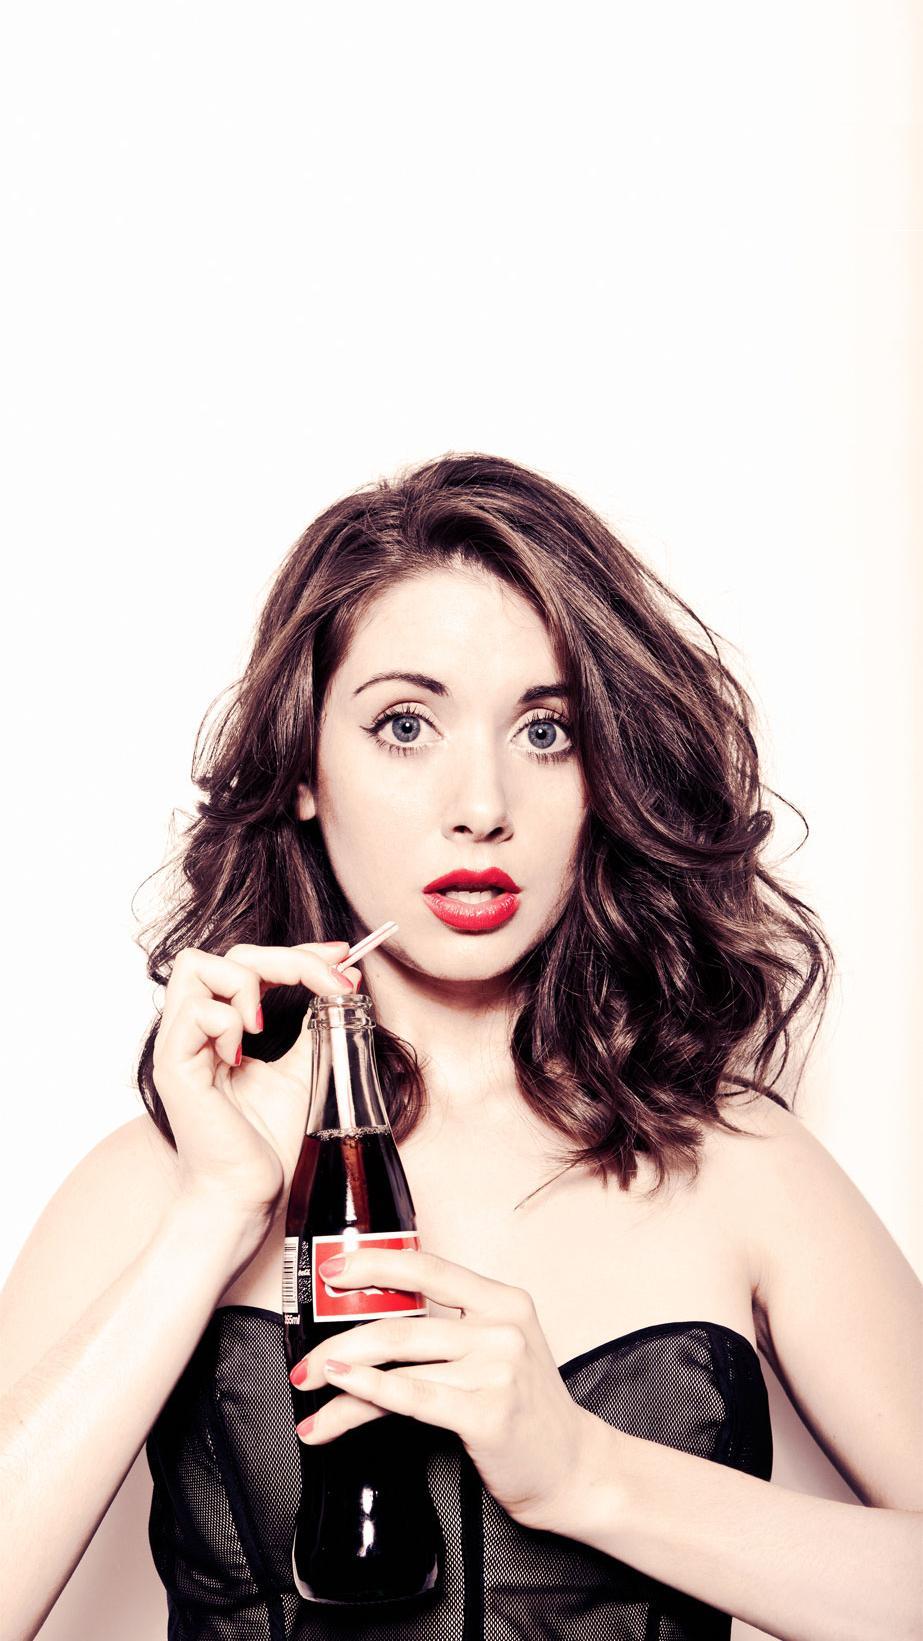 Alison Brie wallpaper for iPhone 5 or any device that has a 16:9